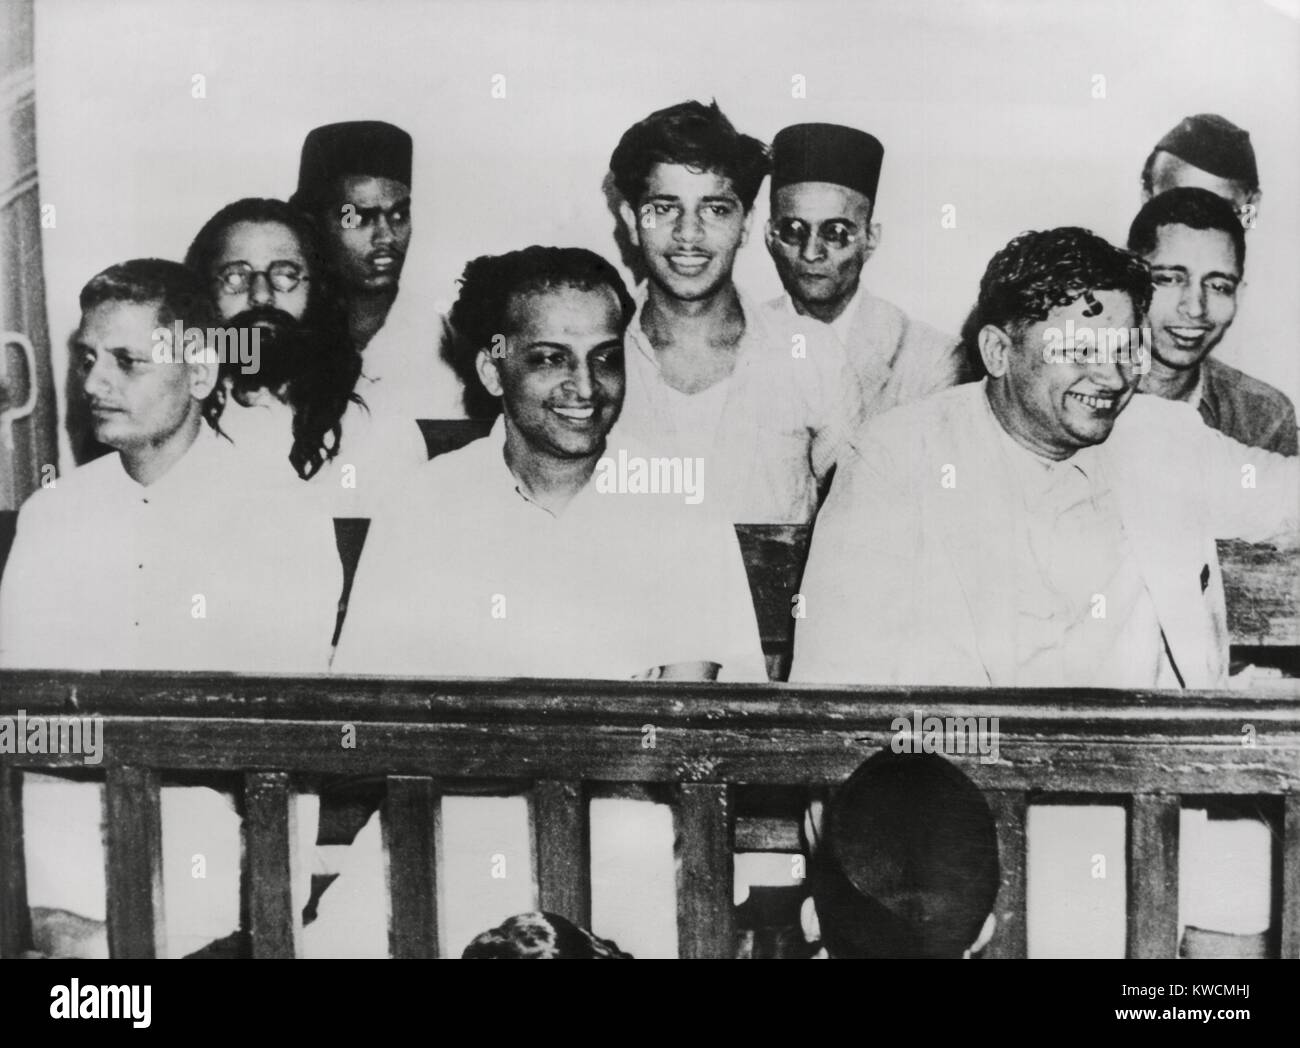 The men accused in the murder of Mohandas Gandhi. Of the group on trial, Nathuram Godse and Narayan Apte were sentenced to hanging, Shankar Kistaiya and Parchure were acquitted. The others were sentenced to life imprisonment. Front row, L-R: Nathuram Godse; Narayan Apte, Vishnu Karkare. 2nd Row, L-R: Digambar Ramchandra Badge (obscured); Shankar Kistaiya; Gopal Godse. 3rd Row: no ID; Vinayak Savarkar; S.D.Parchure. May 1948. - (BSLOC 2014 15 192) Stock Photo